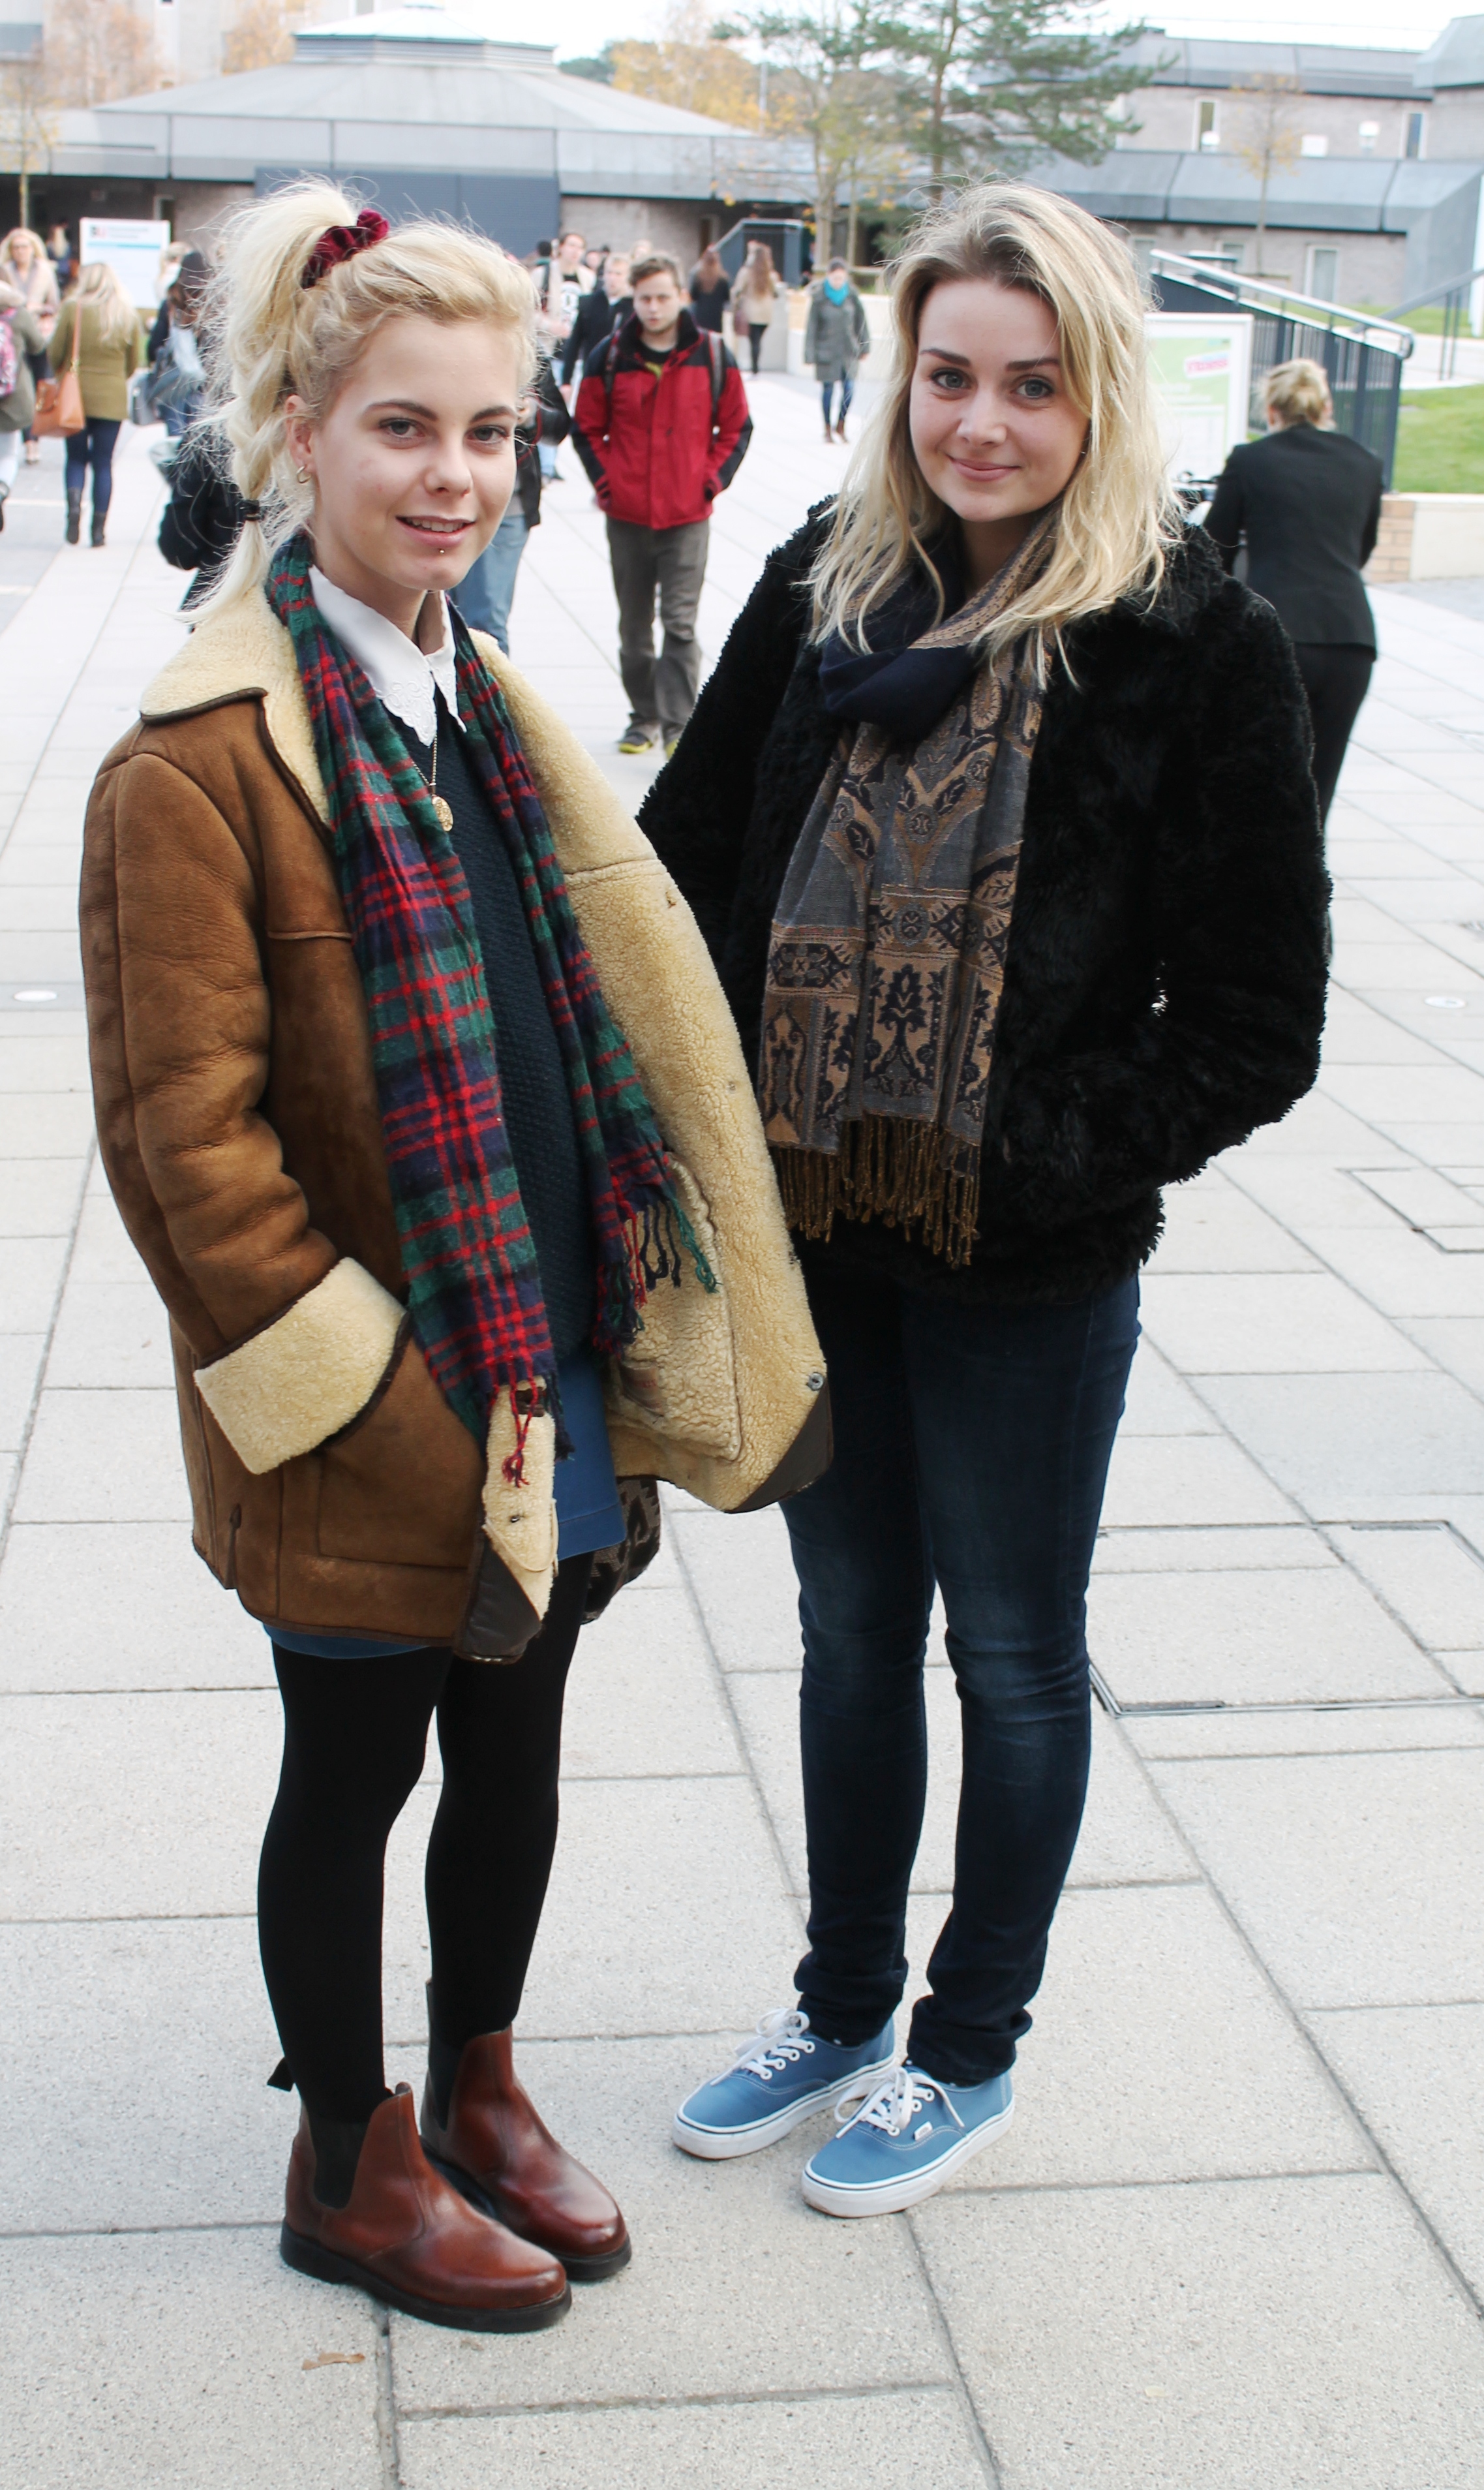 Taylor Gilmore in her vintage suede coat and Sarah Connel wearing faux fur.